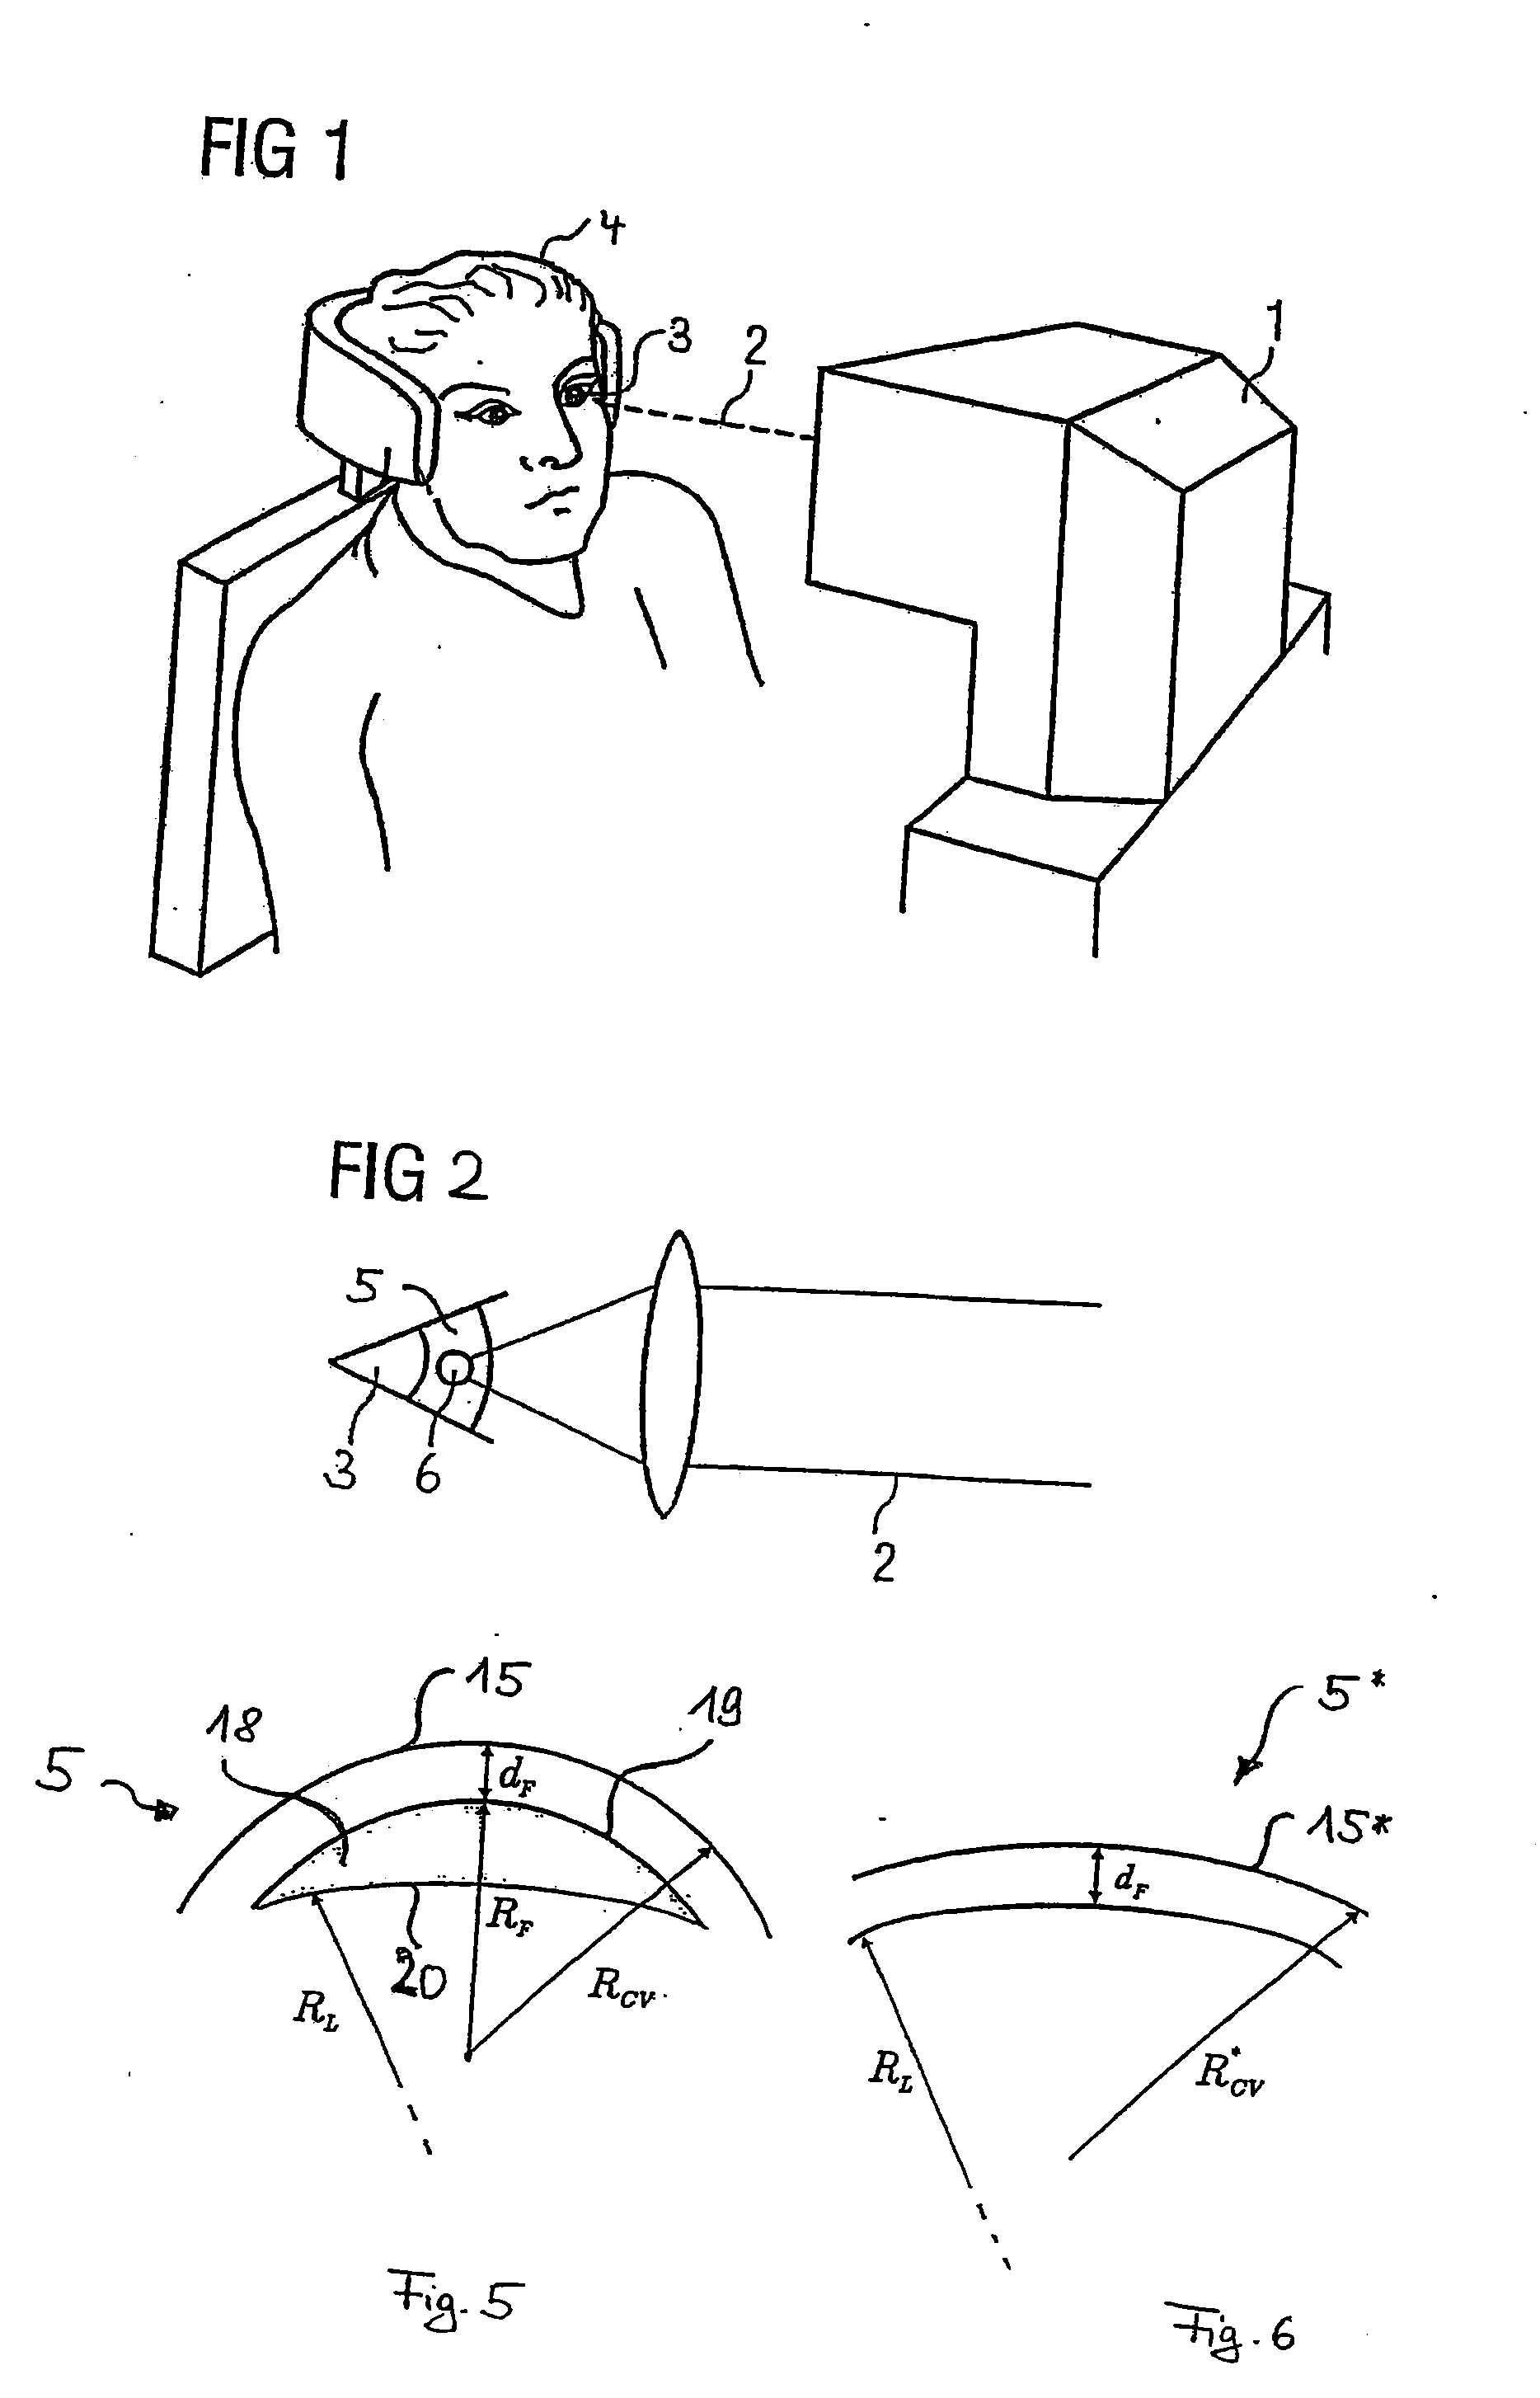 Treatment device for operatively correcting defective vision of an eye, method for producing control data therefor and method for operatively correcting defective vision of an eye